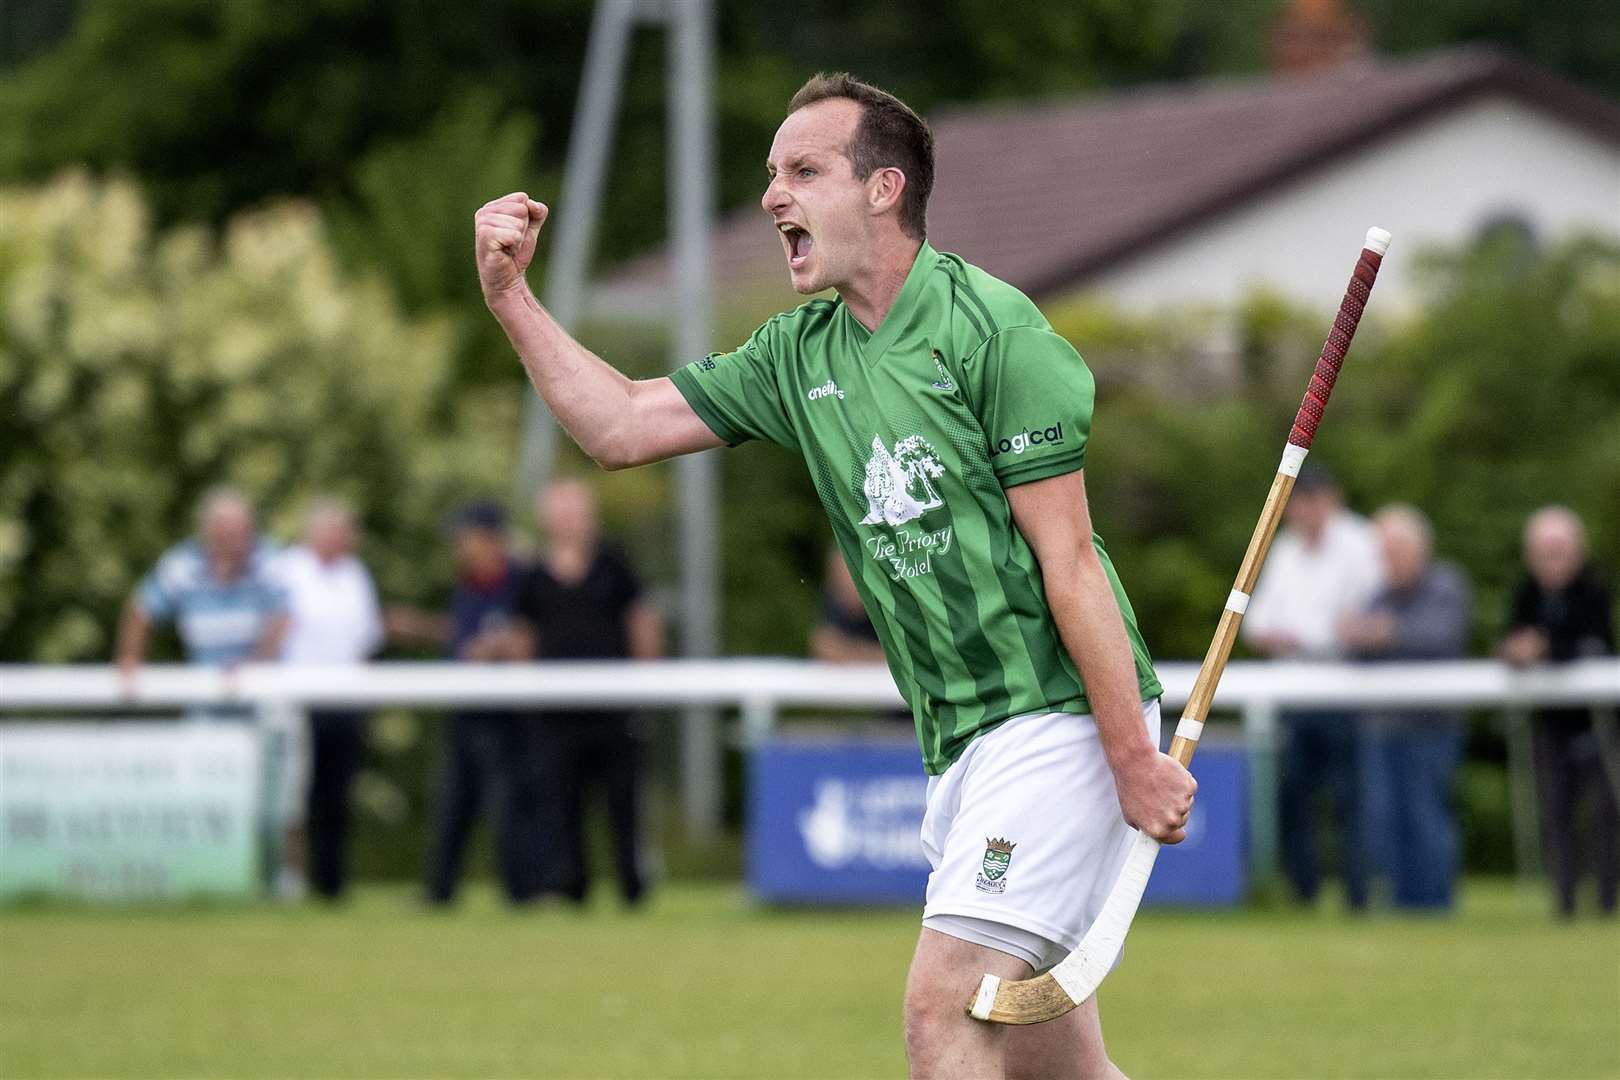 Beauly's David MacLean celebrates on the final whistle. Beauly v Skye Camanachd in the quarter final of the Ferguson Transport Balliemore Cup, played at Braeview, Beauly.